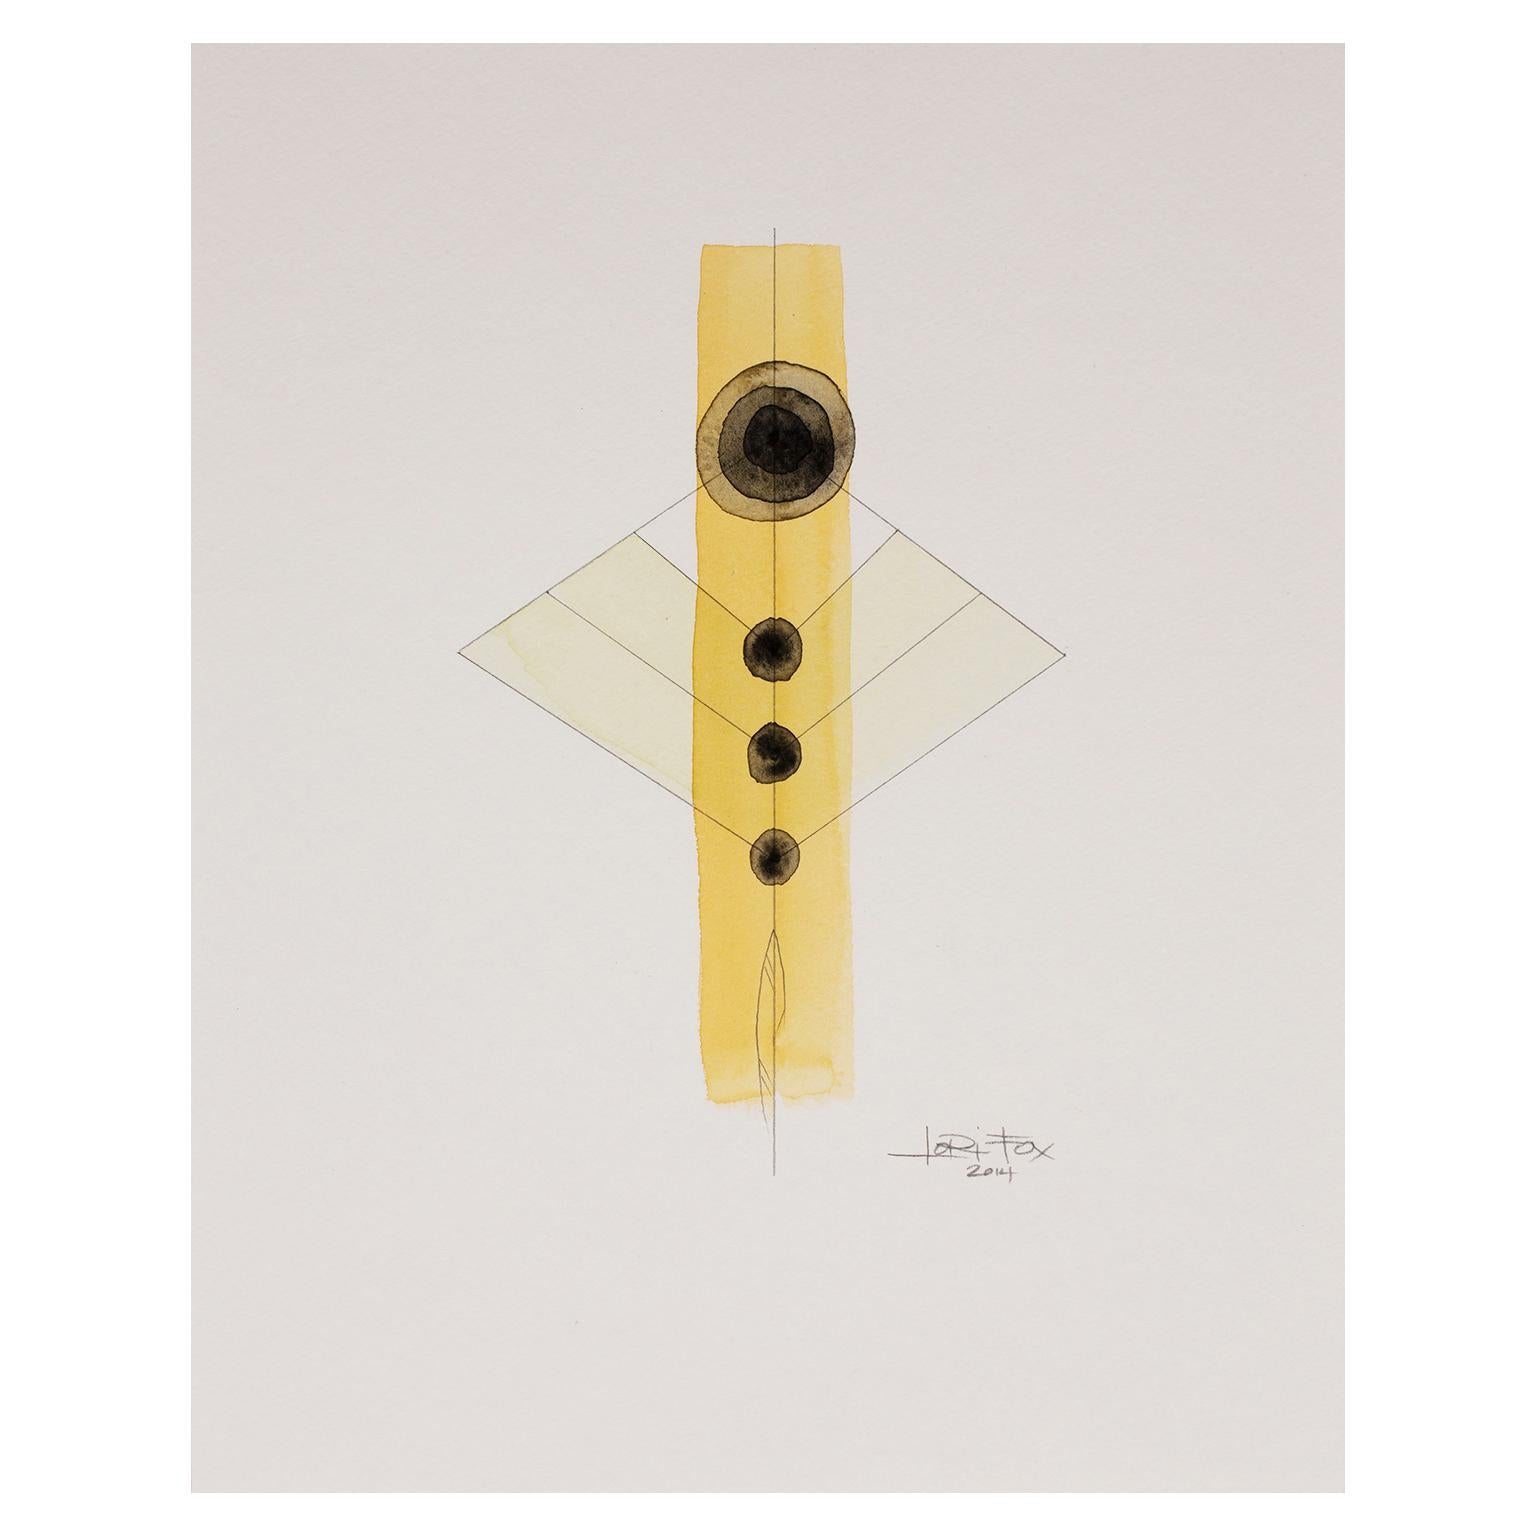 Totem 2.006. Abstract geometric forms. Pencil and watercolor. Black and yellow For Sale 1